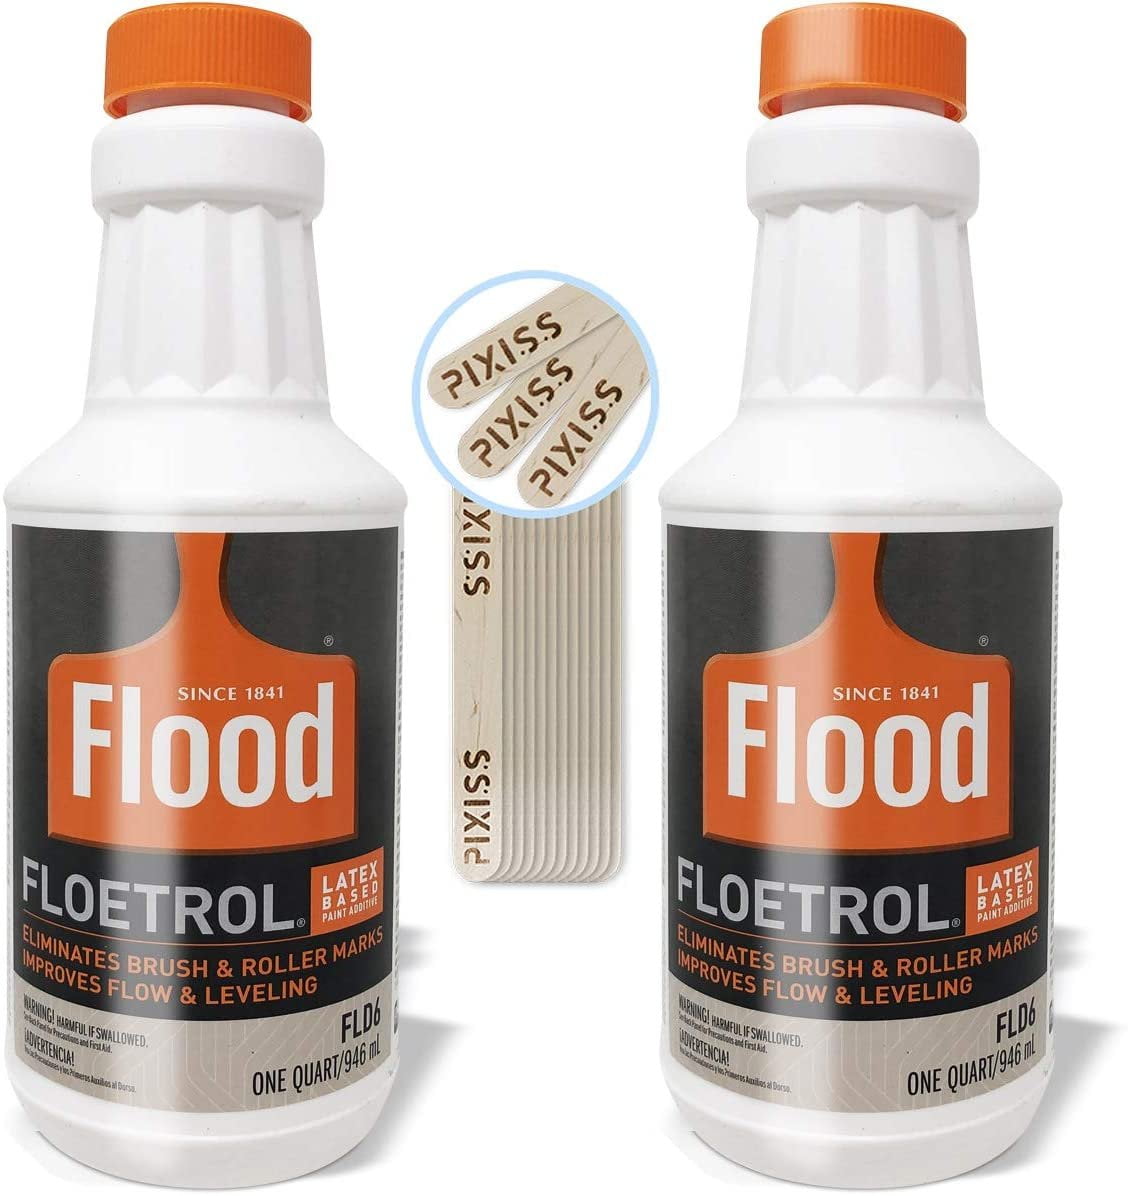 Floetrol-flood Filter for Paint Pouring/ Fluid Painting Fits Us